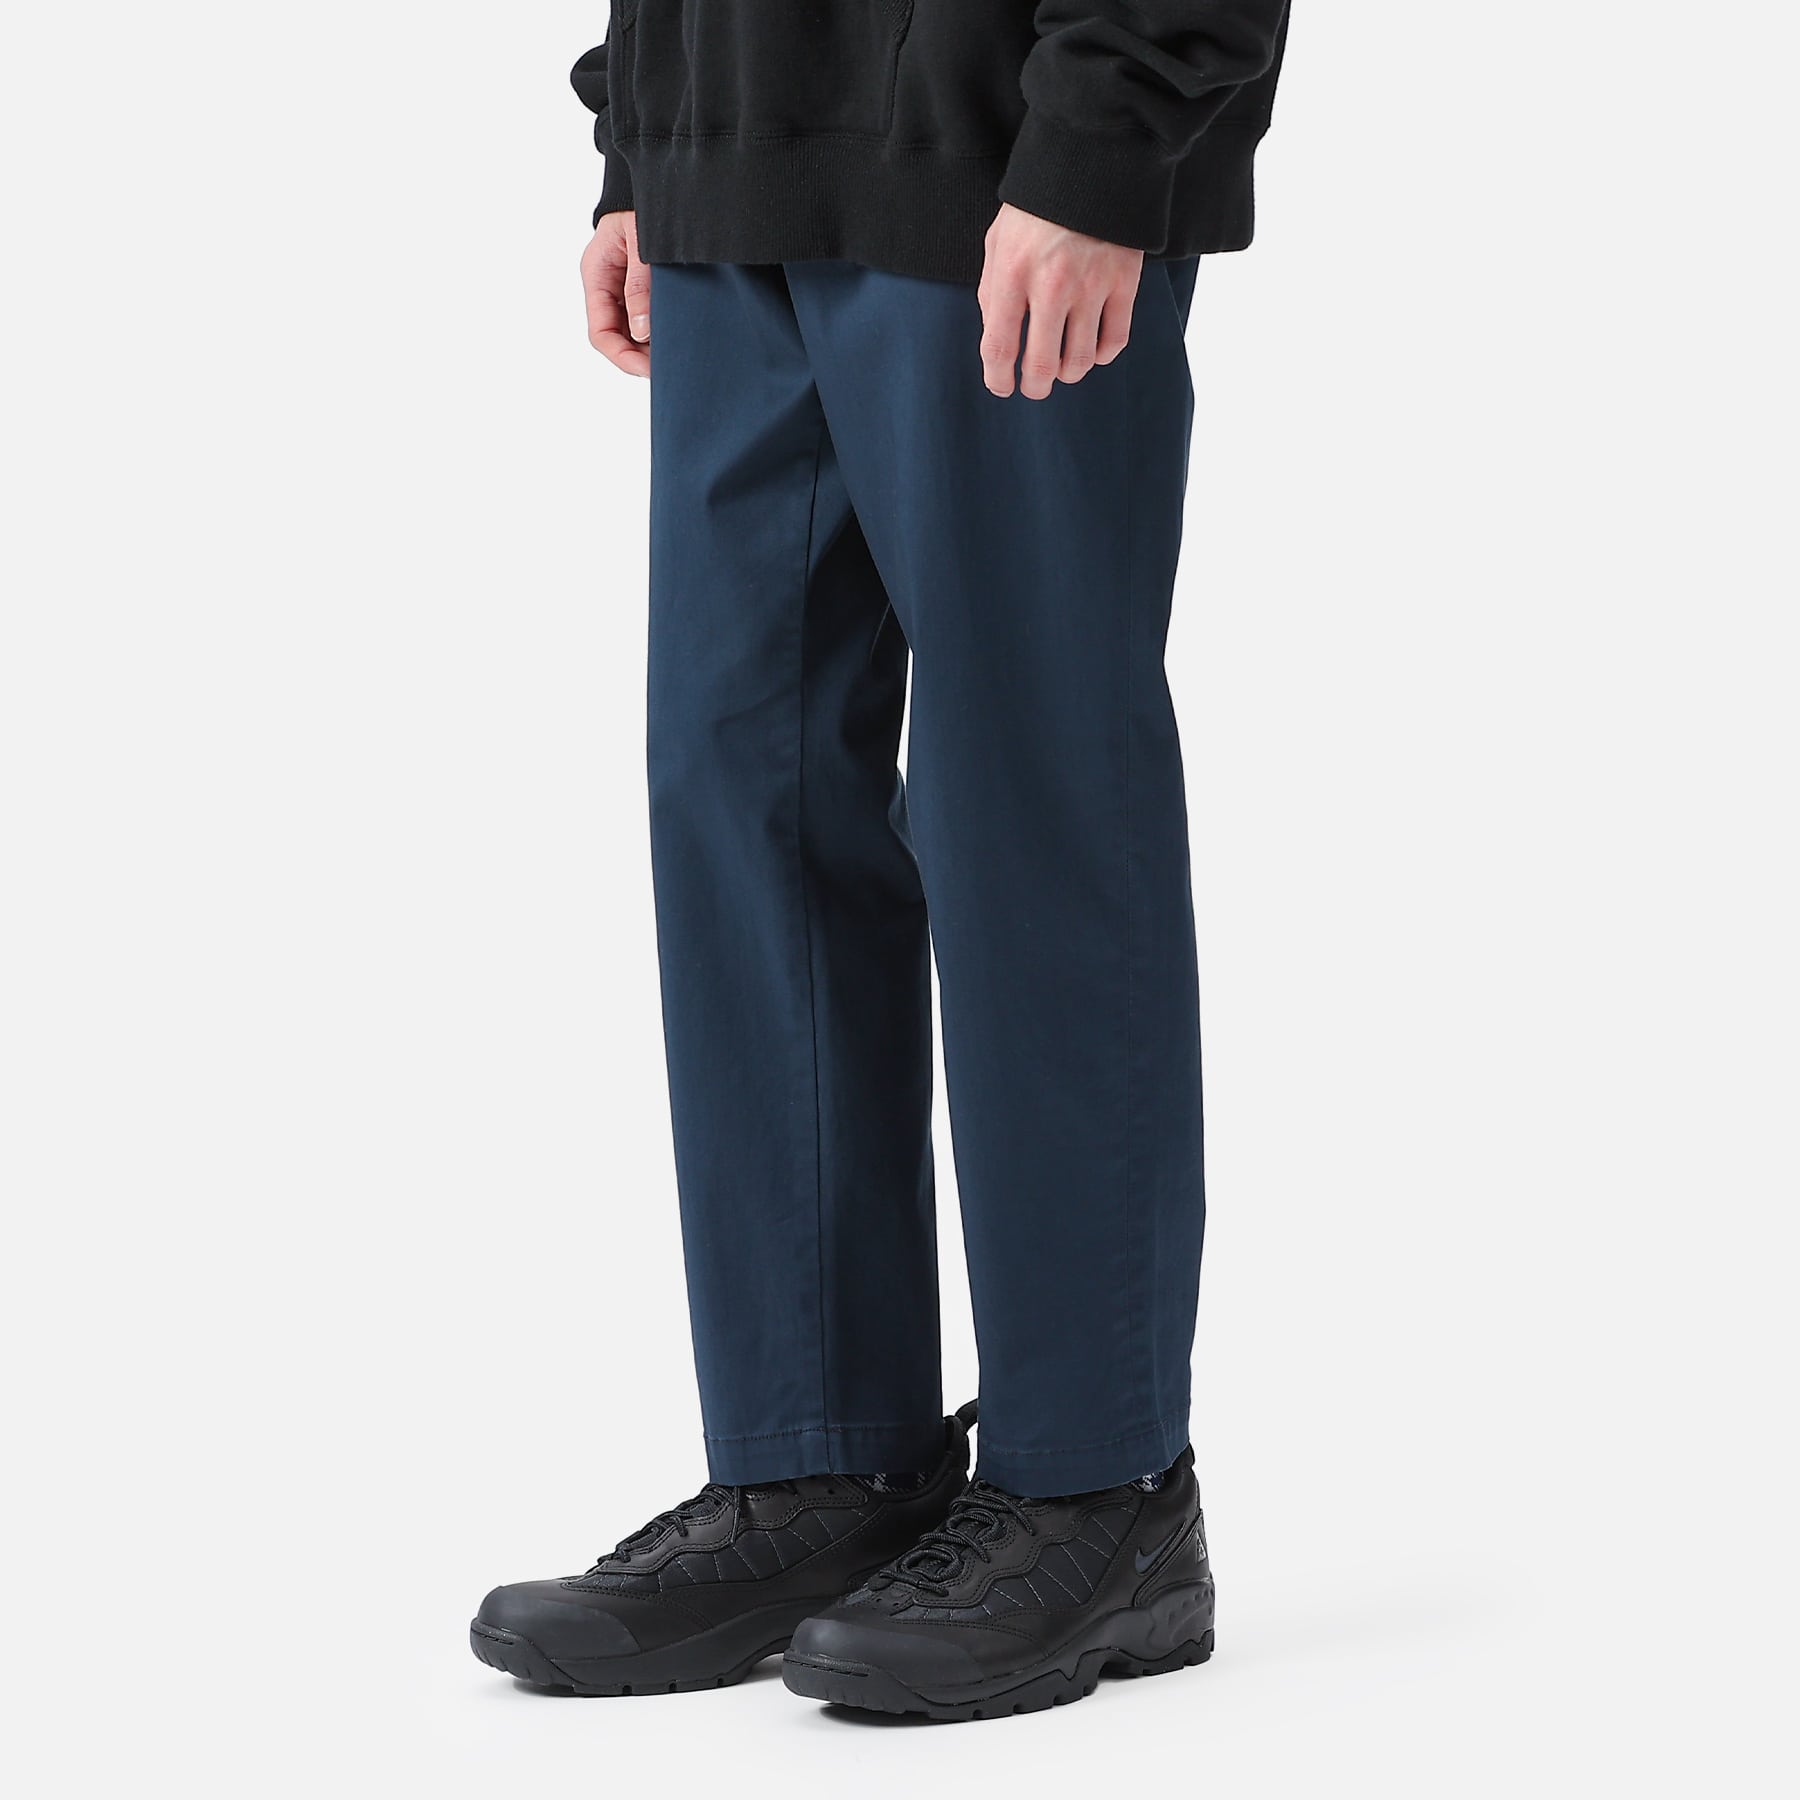 SOPH. | STRETCH CHINO SIDE POCKET TAPERED PANTS(2 NAVY):